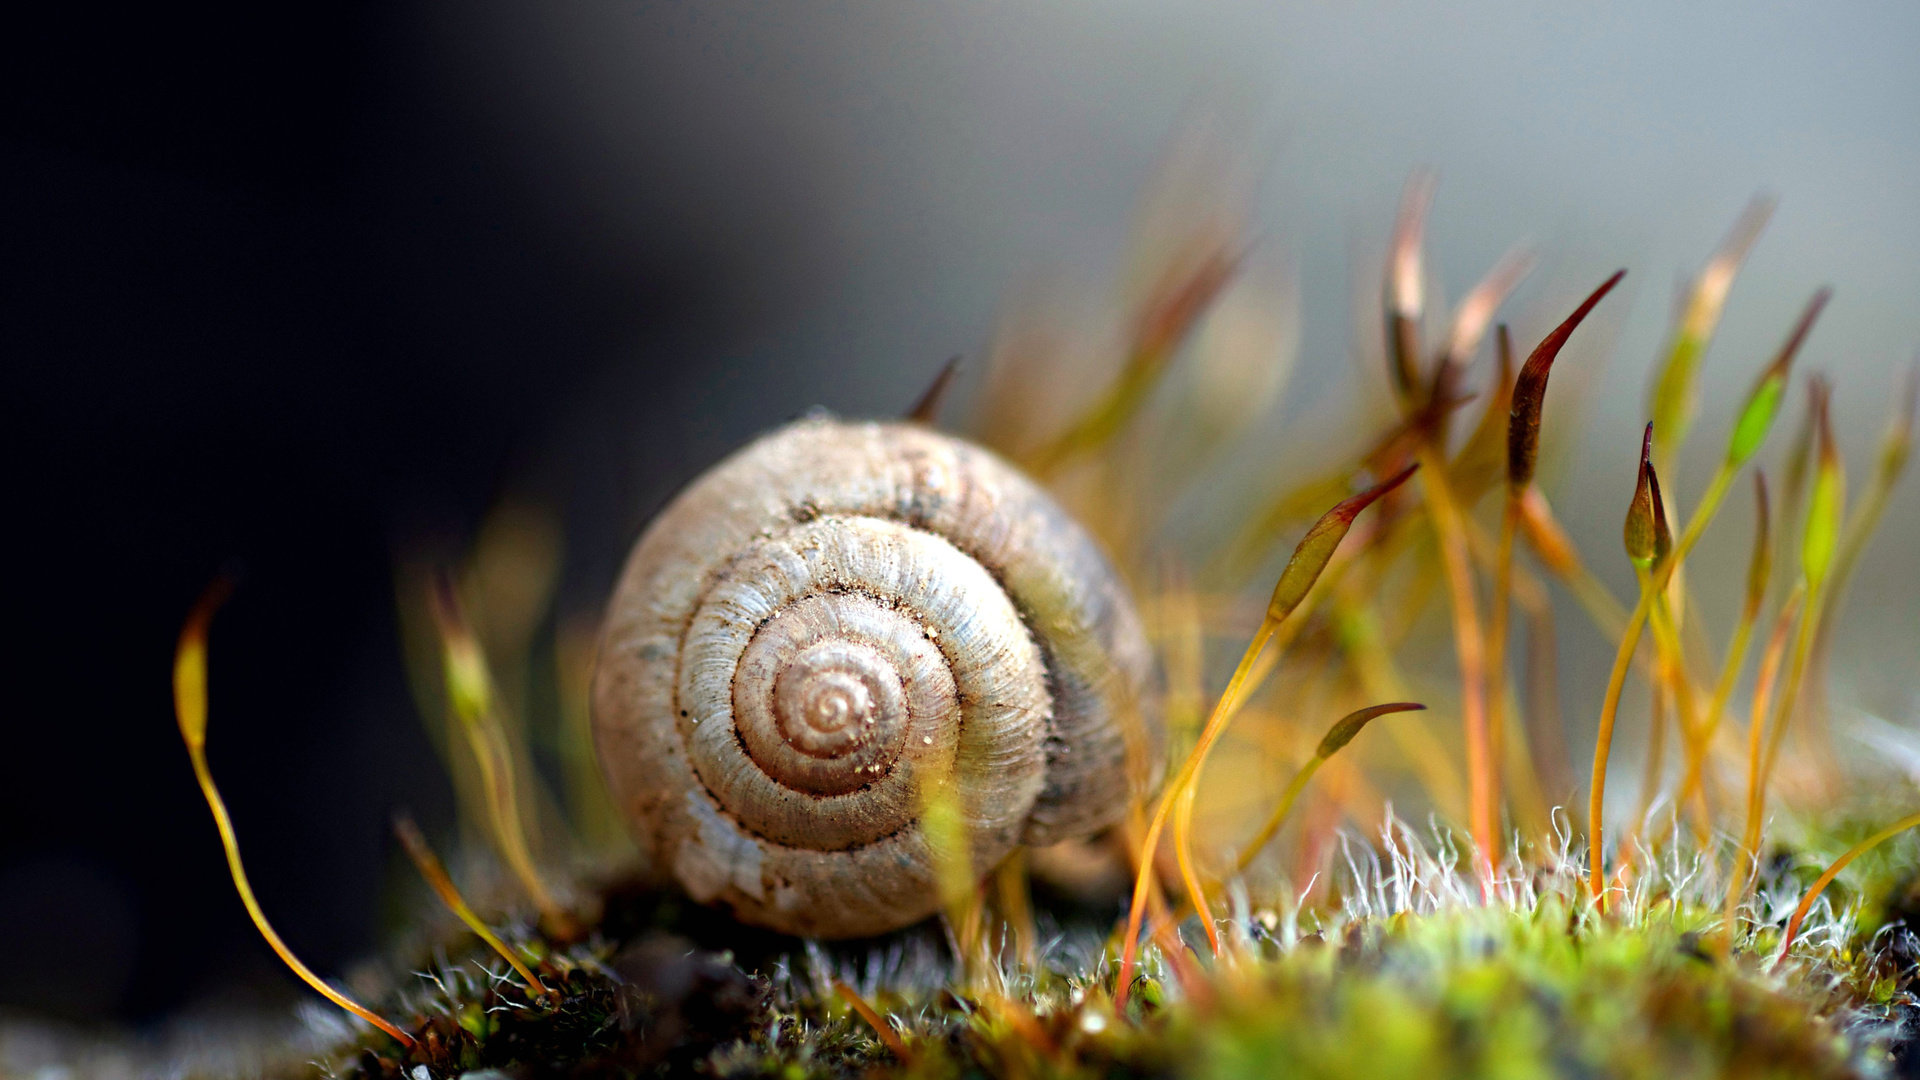 Download 1080p Snail desktop background ID:198834 for free